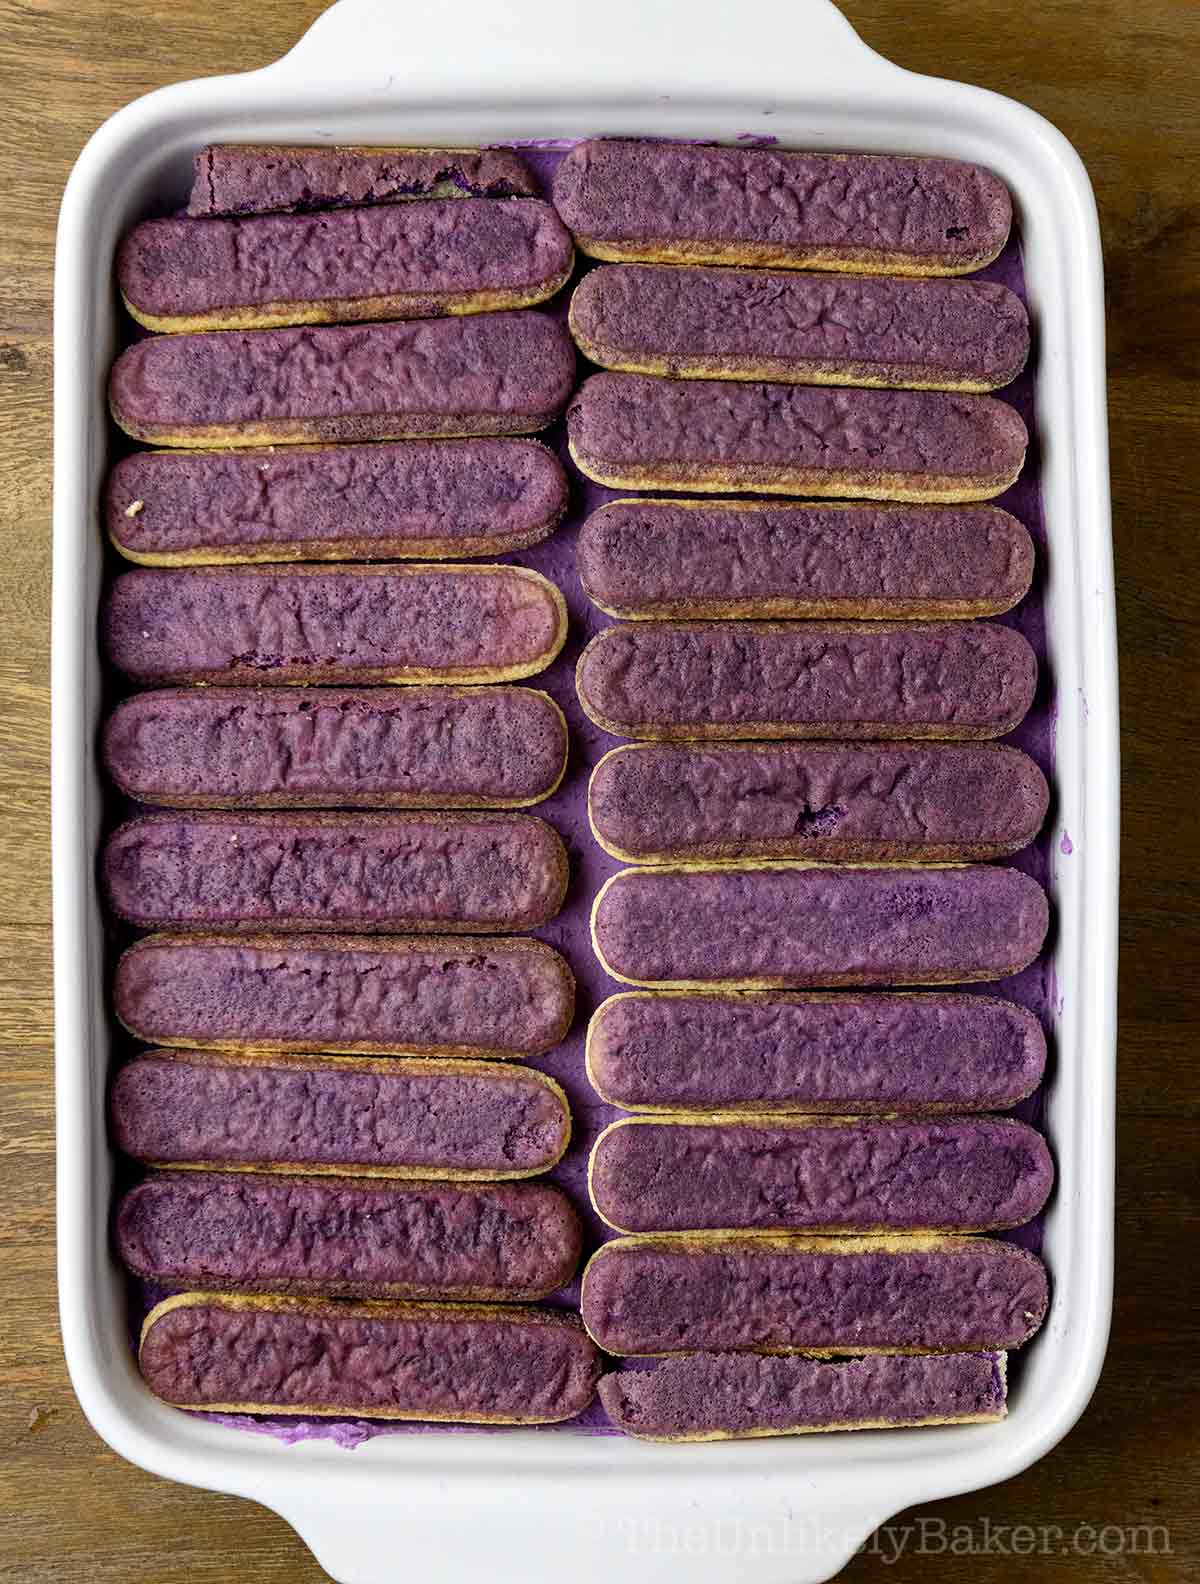 Ladyfinger cookies dipped in ube syrup placed on a baking dish.